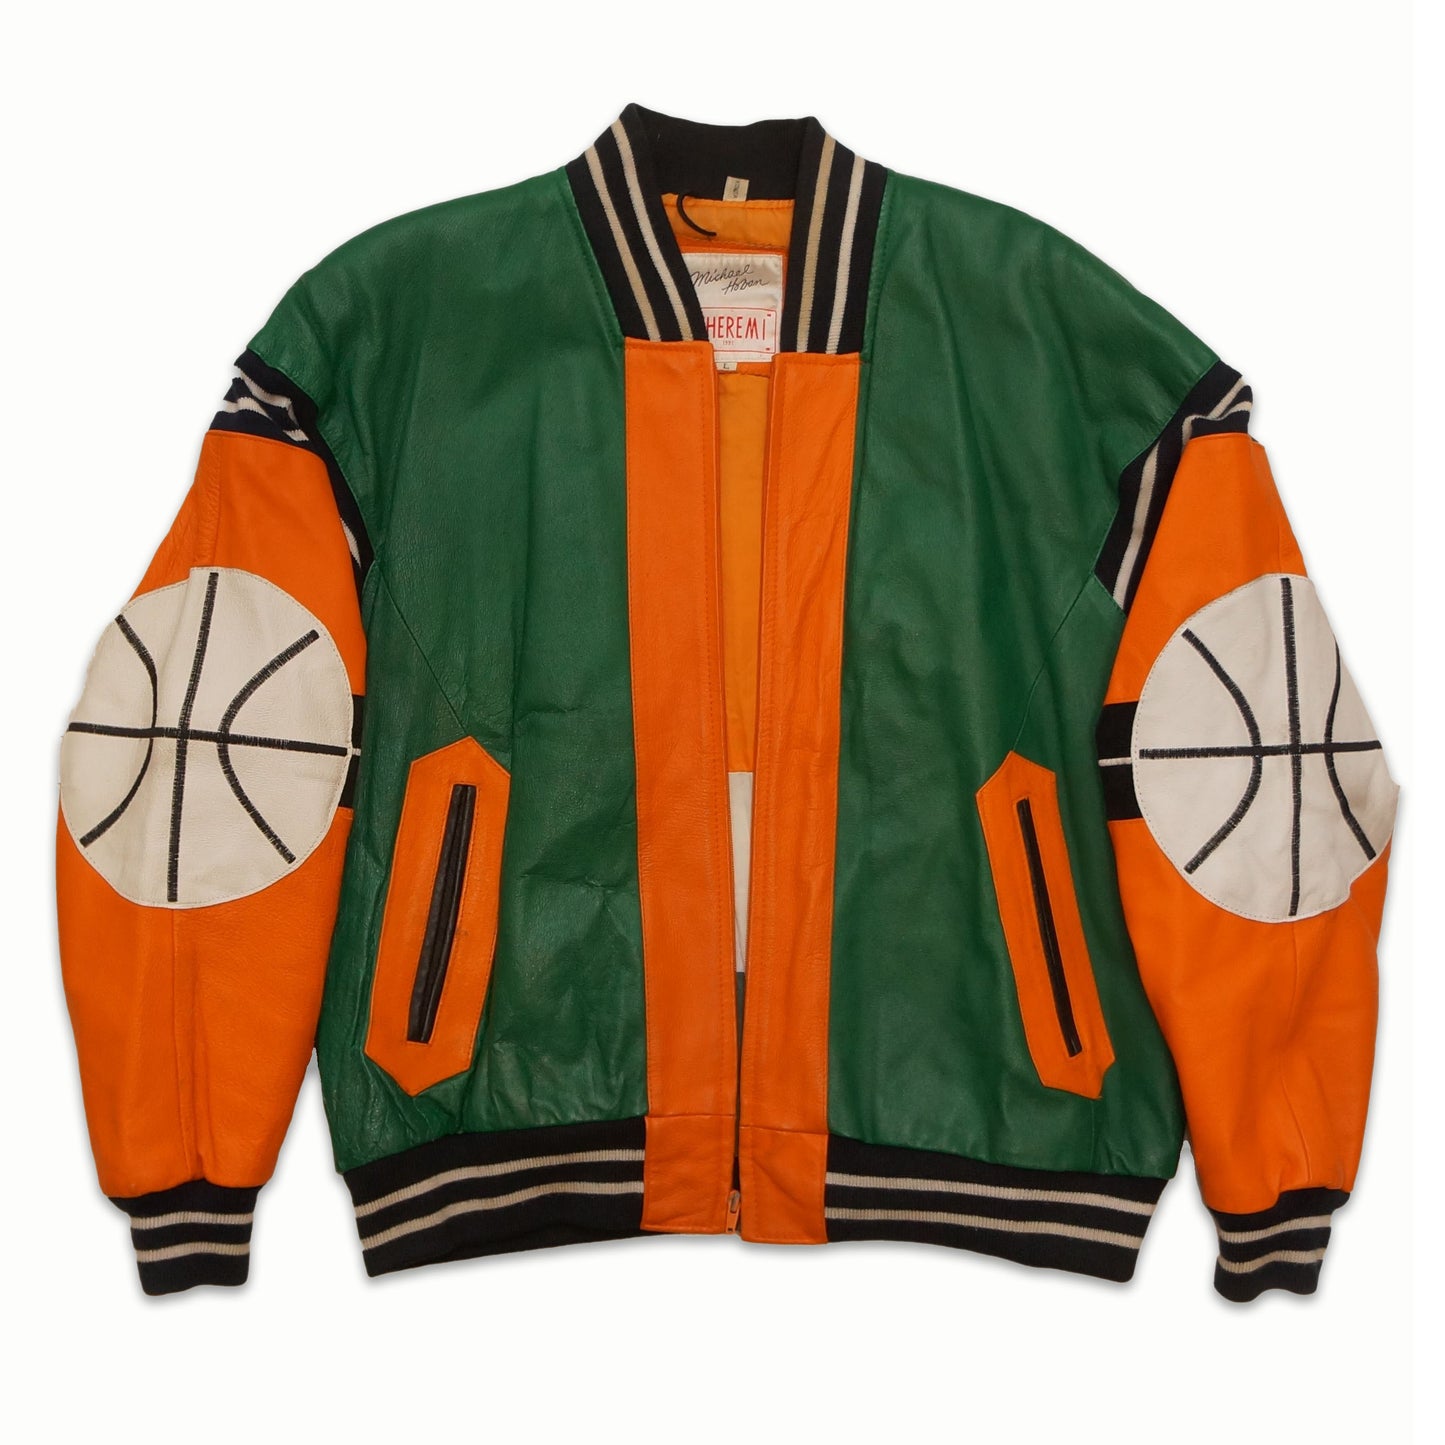 Vintage Orange, white and Green Leather "Basket Ball" Jacket By Michael Hoban